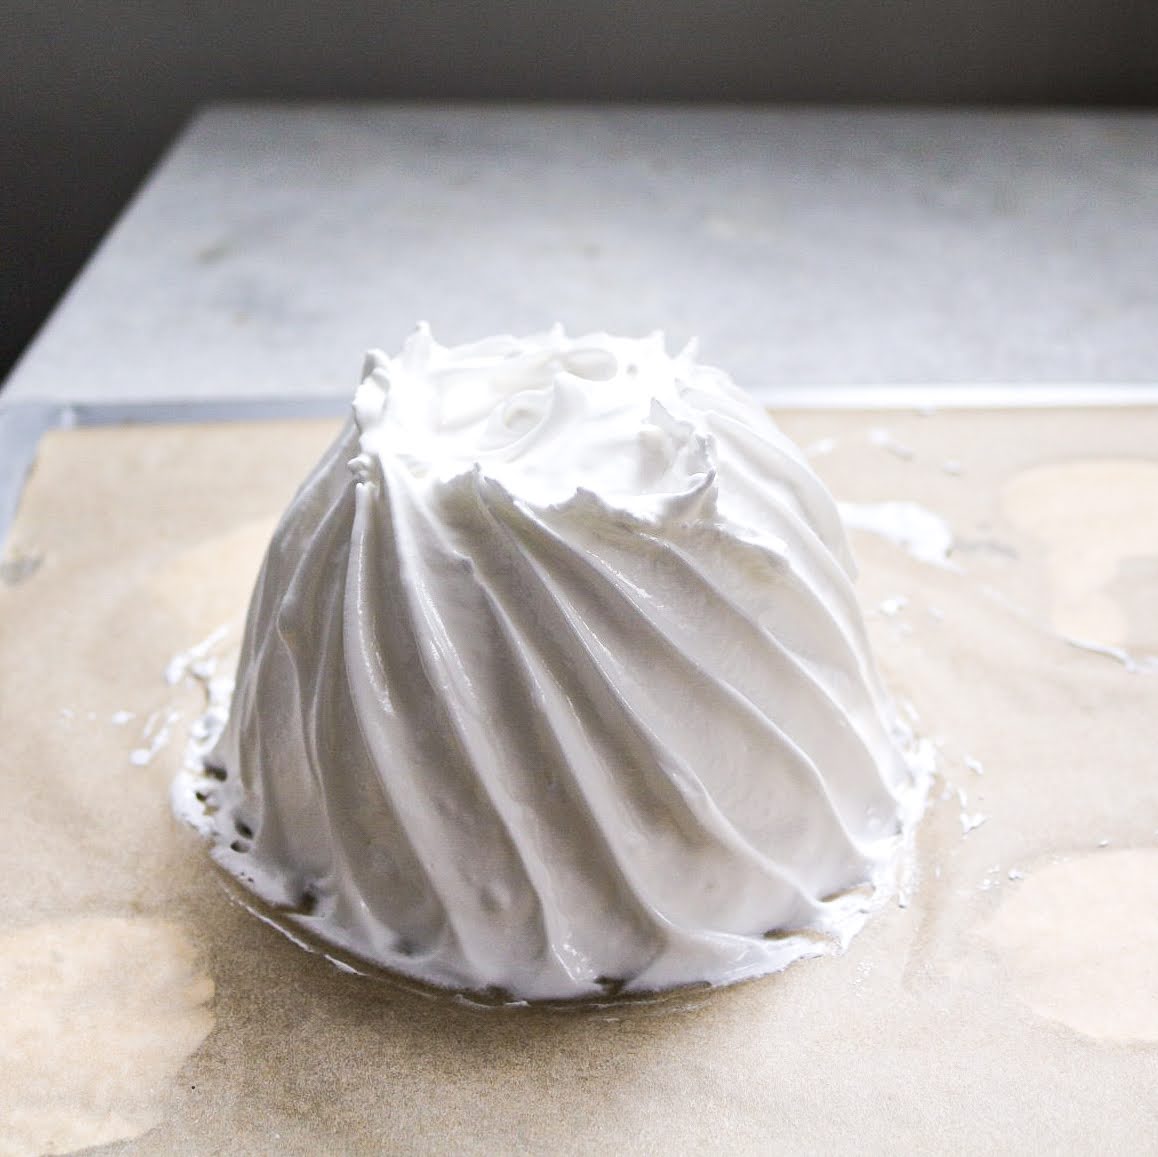 image of the design work on the meringue